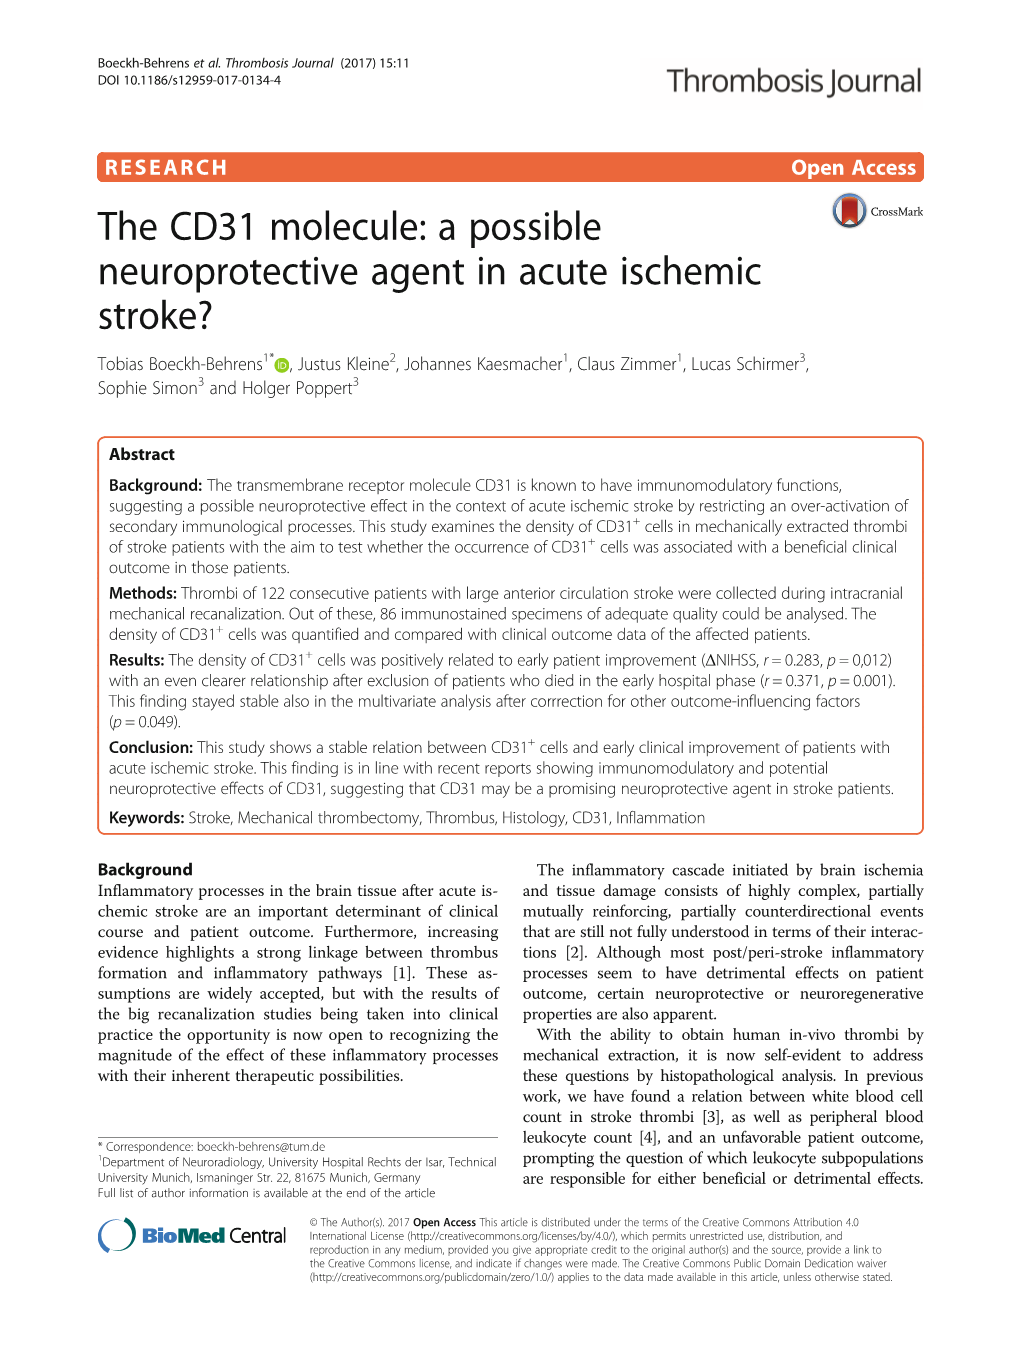 A Possible Neuroprotective Agent in Acute Ischemic Stroke?